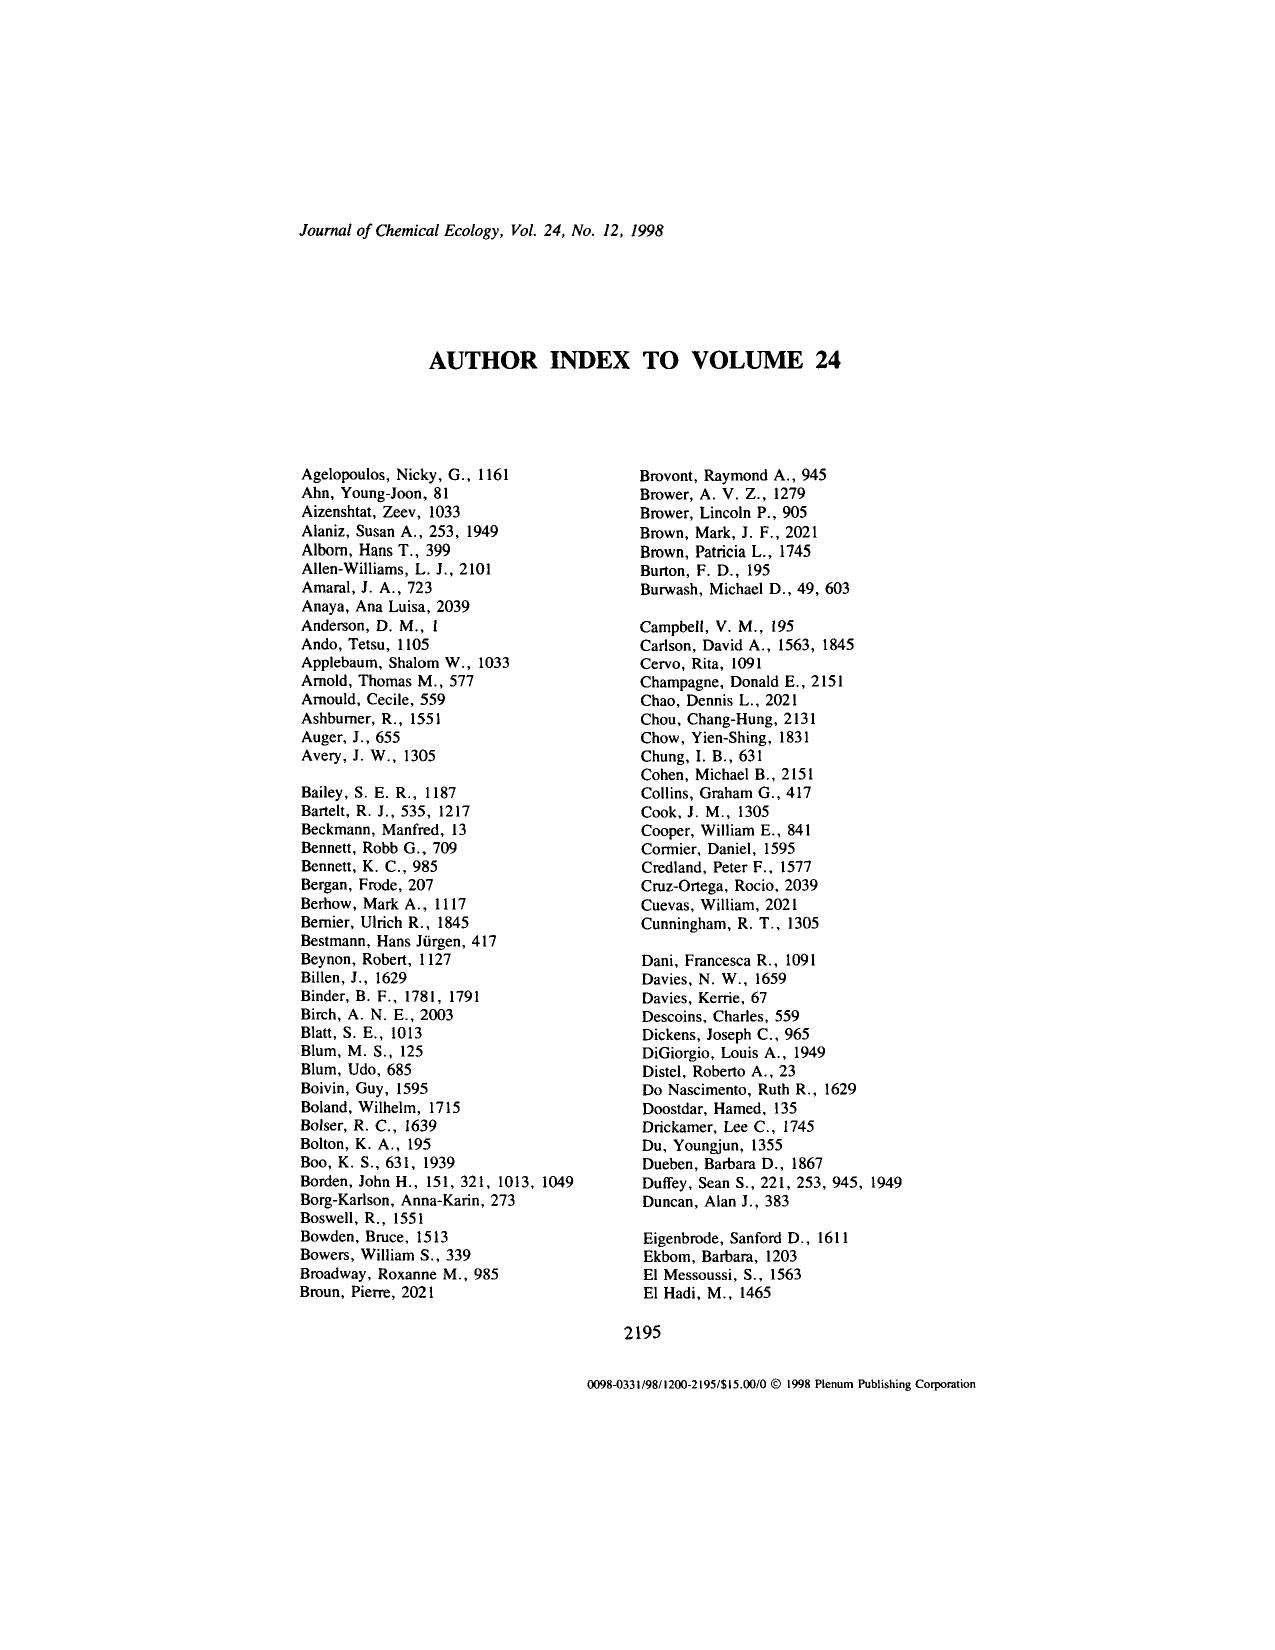 Author Index to Volume 24 by Unknown